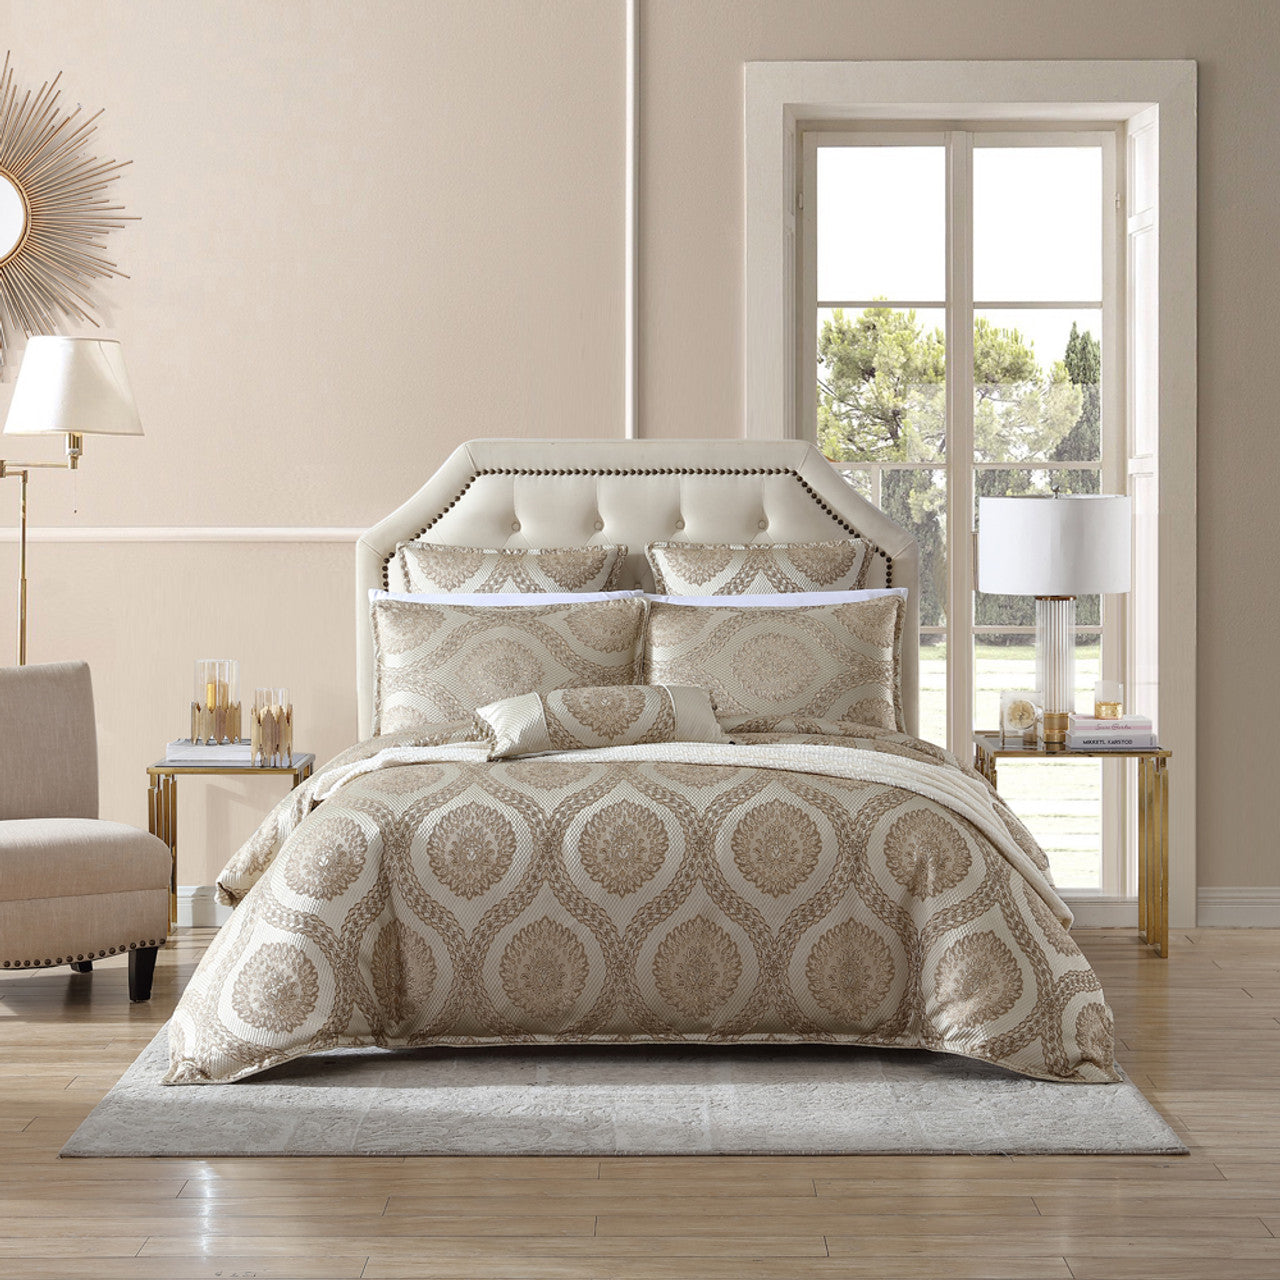 The Davinci Sistine Gold Bed Quilt Cover Set showcases captivating Italian-inspired patterns that embellish its remarkable design. Crafted with intricate weaving, this opulent ensemble stimulates the senses through its contrasting textures and visually captivating golden tones.